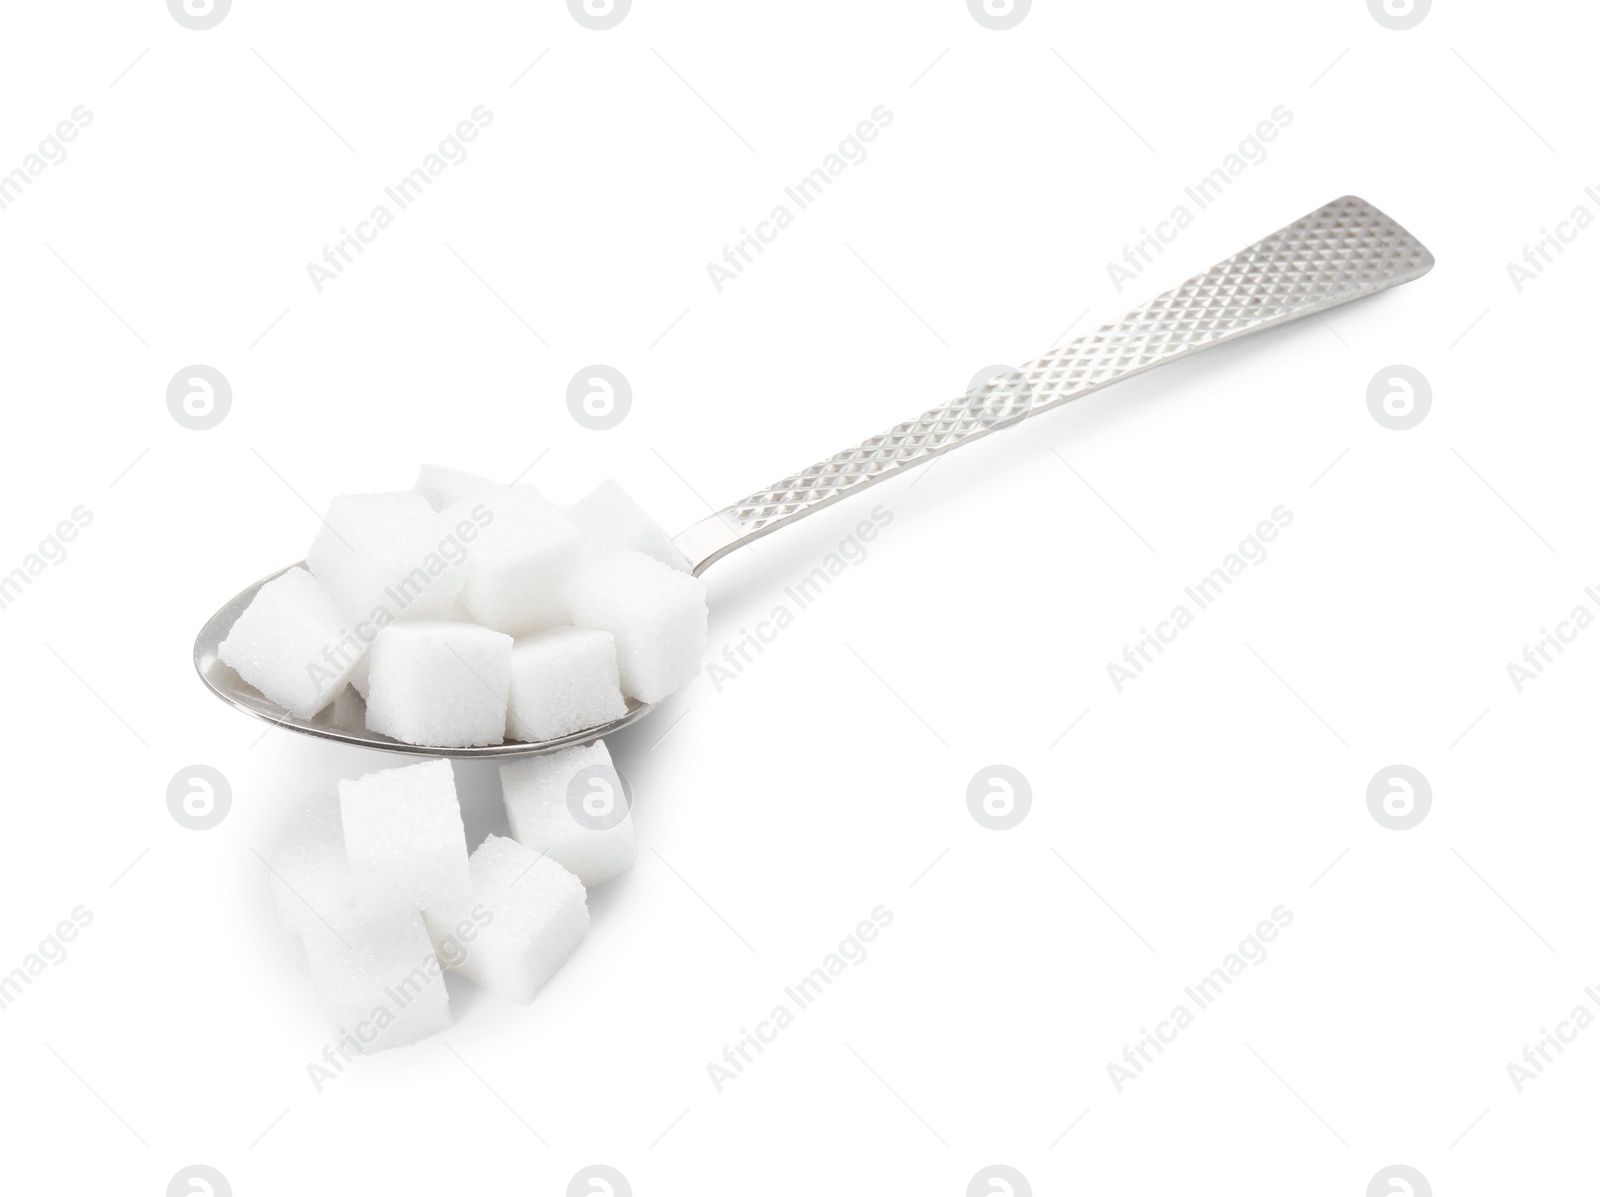 Photo of Sugar cubes and metal spoon isolated on white